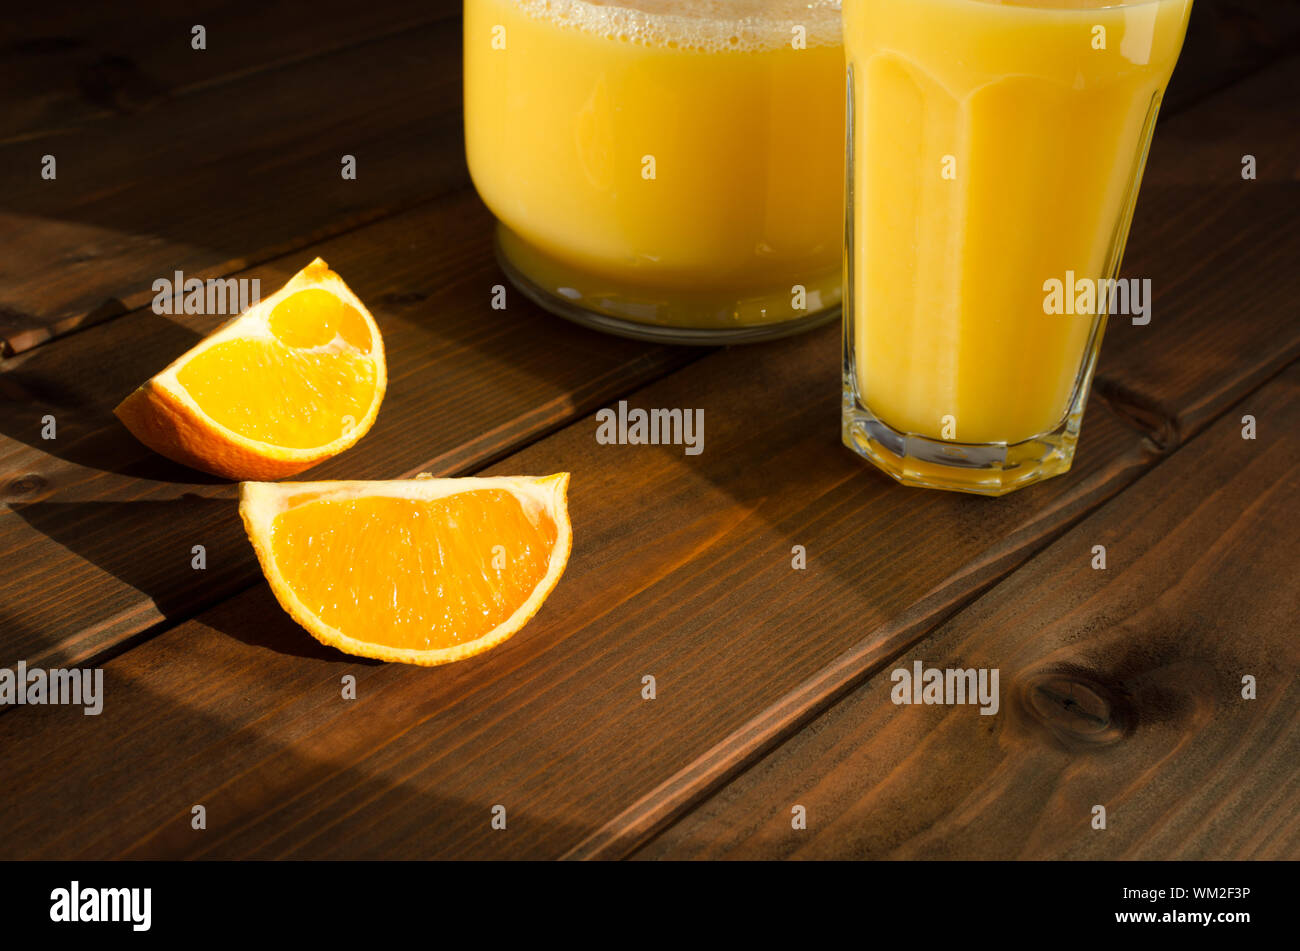 Simple picture orange with fresch juice on table Stock Photo